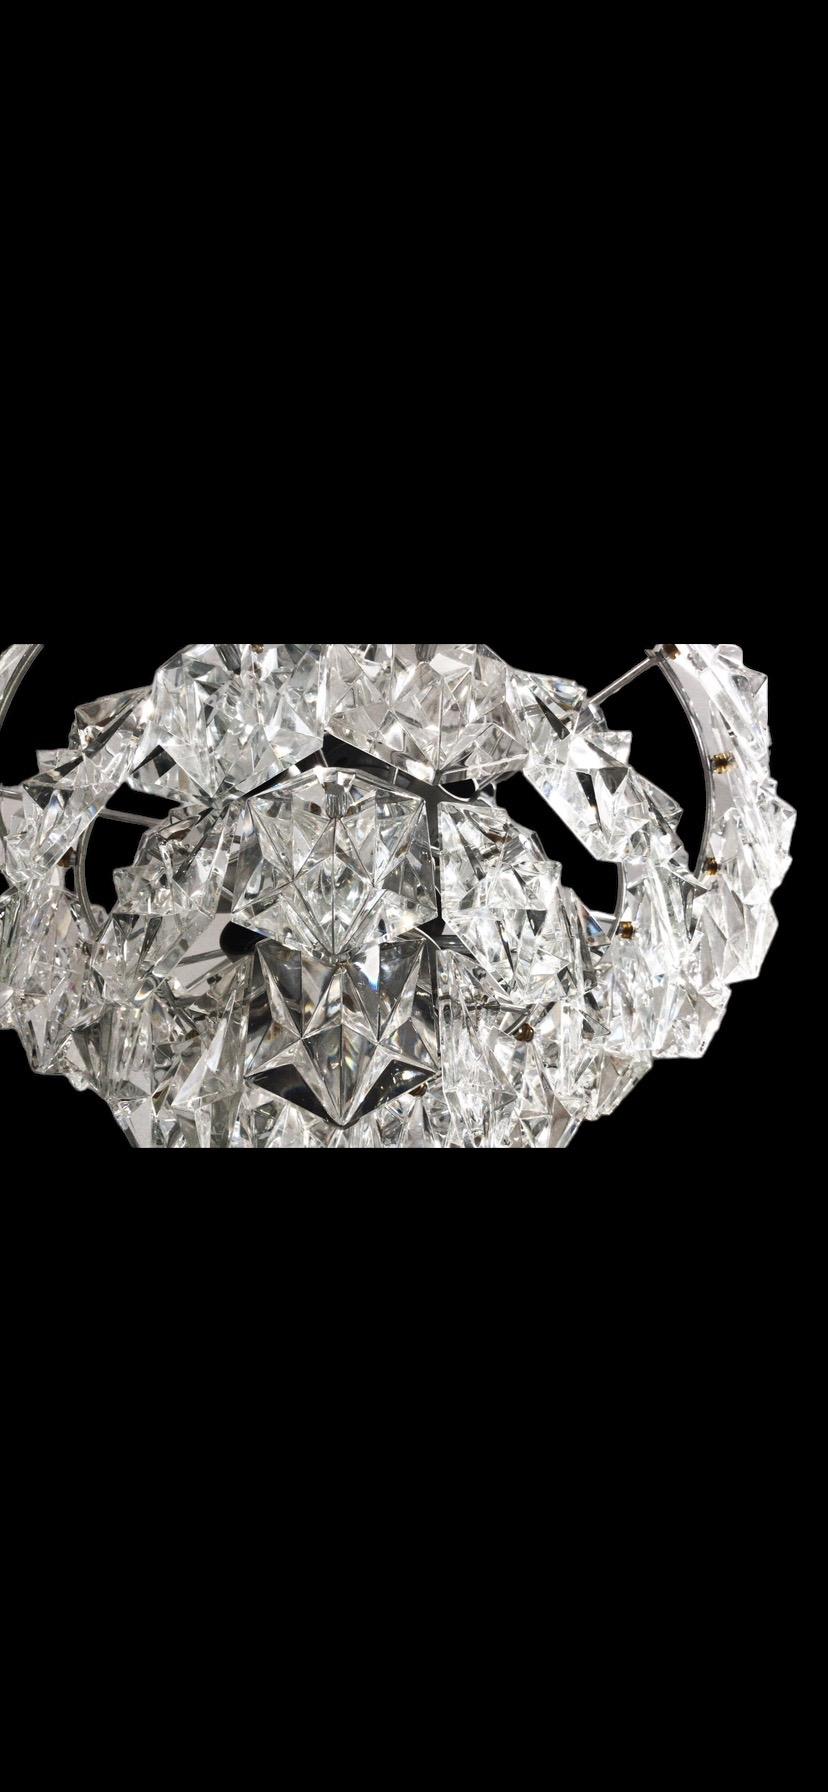 Exceptional Kinkeldey Sconce with Diamond glass with chrome structure. The Design and the quality of the glass make this piece the best of the Austrian Design.

This unique Kinkeldey glass Diamond sconce are exceptional by the size and the